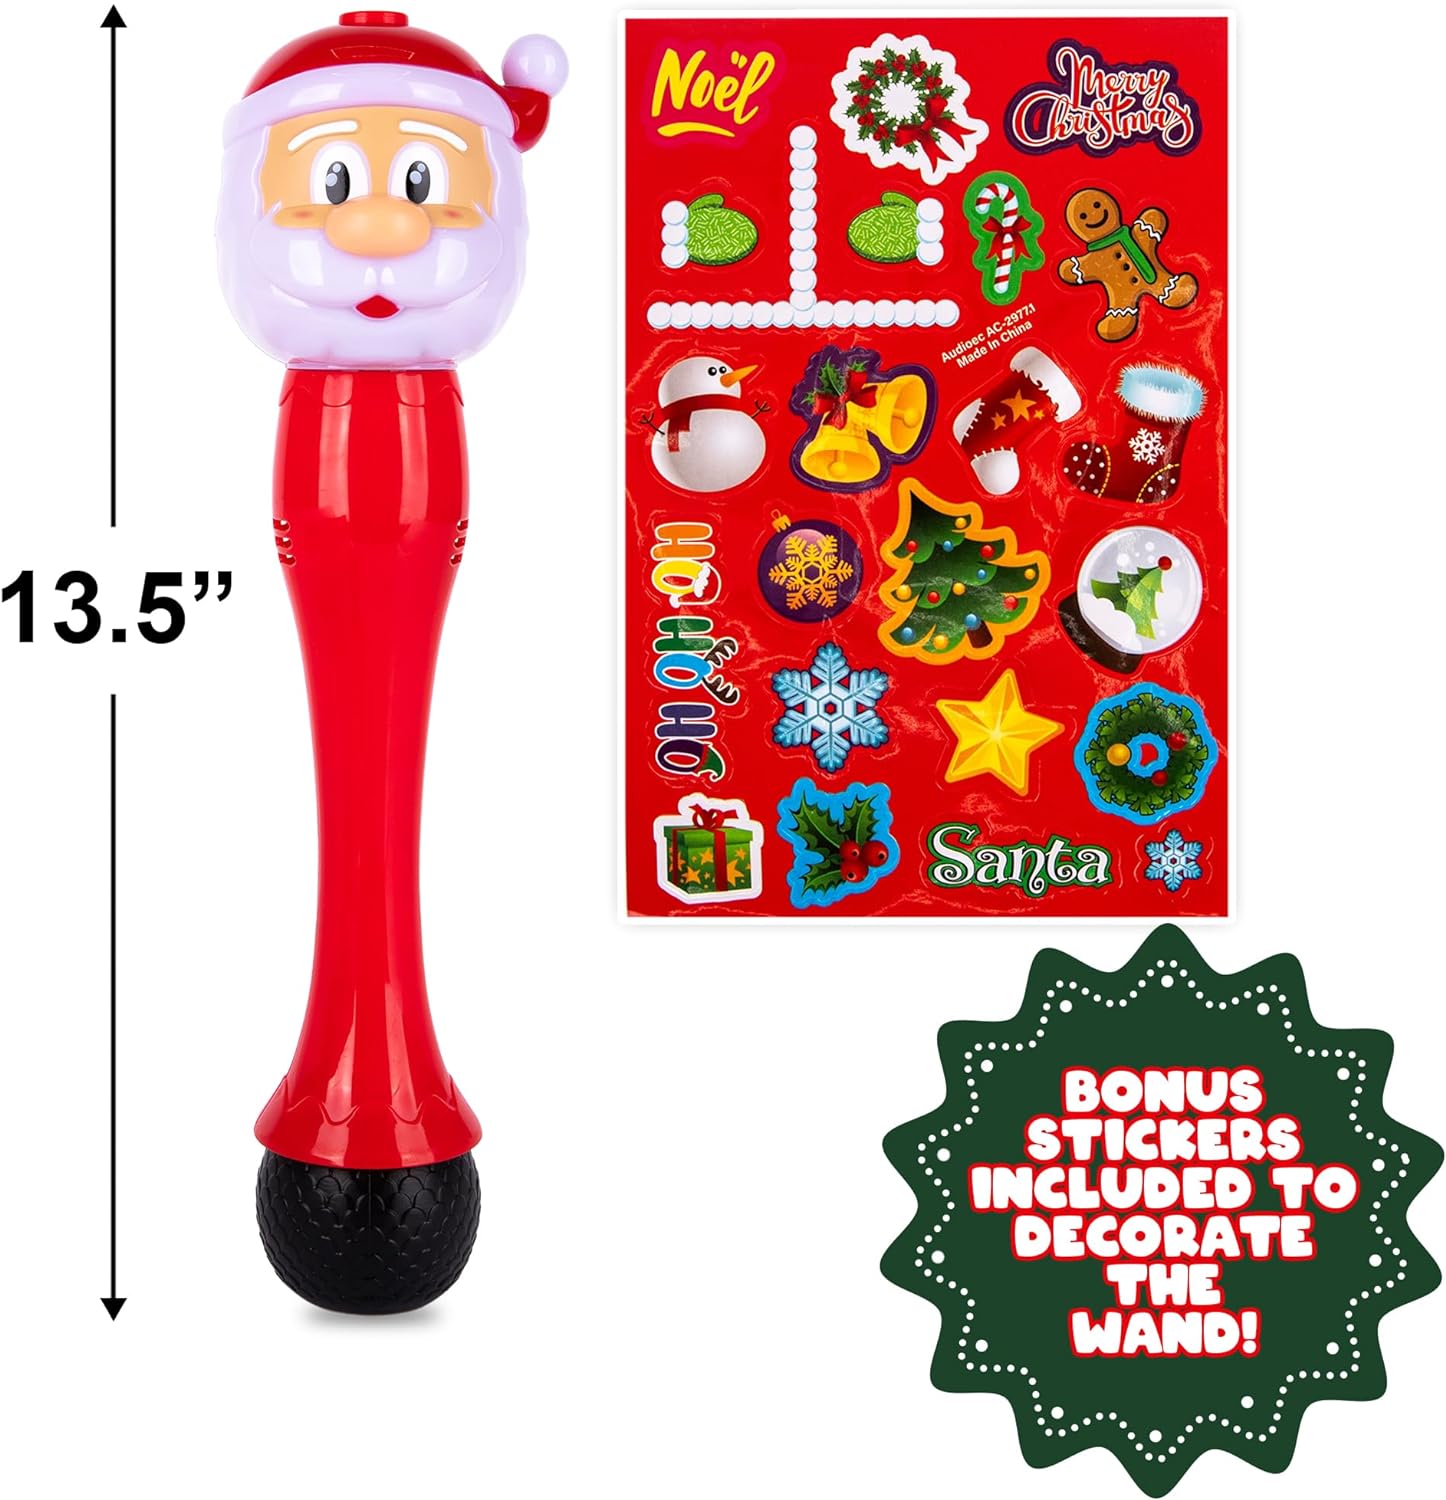 Light Up Christmas Santa Bubble Wand for Kids, 14 Inch Bubble Blower with Lights & Sound Effects, Bubbles for Kids Ages 1 2 3 4 5 6 Bubble Toys, Christmas Goodie Bag Stocking Stuffers for Toddlers